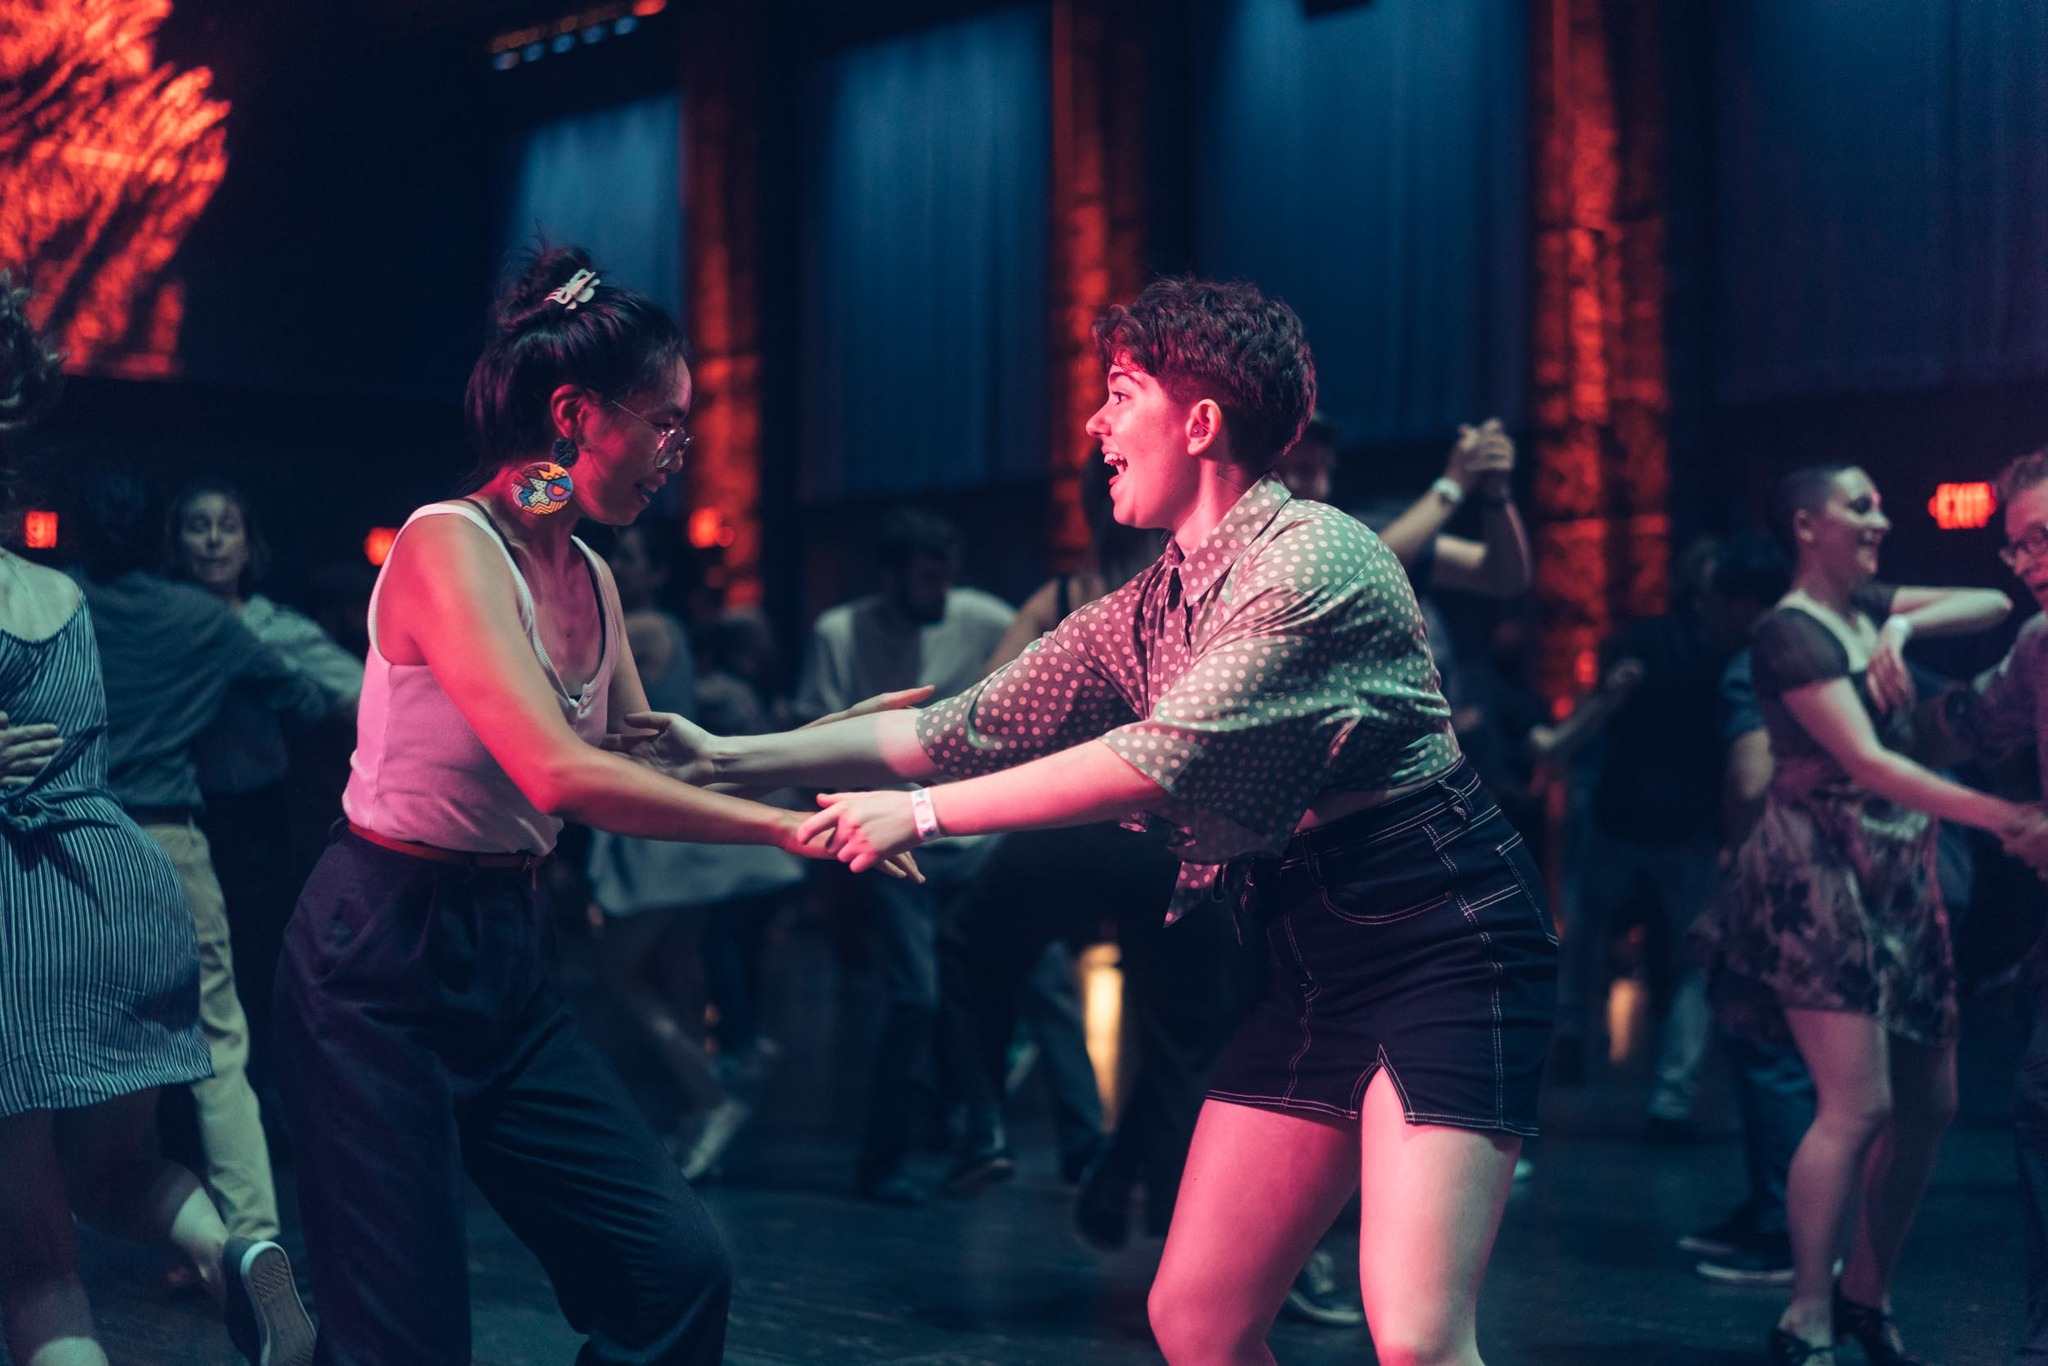 Two people dance together in a dimly lit, colorful setting surrounded by other dancing pairs.